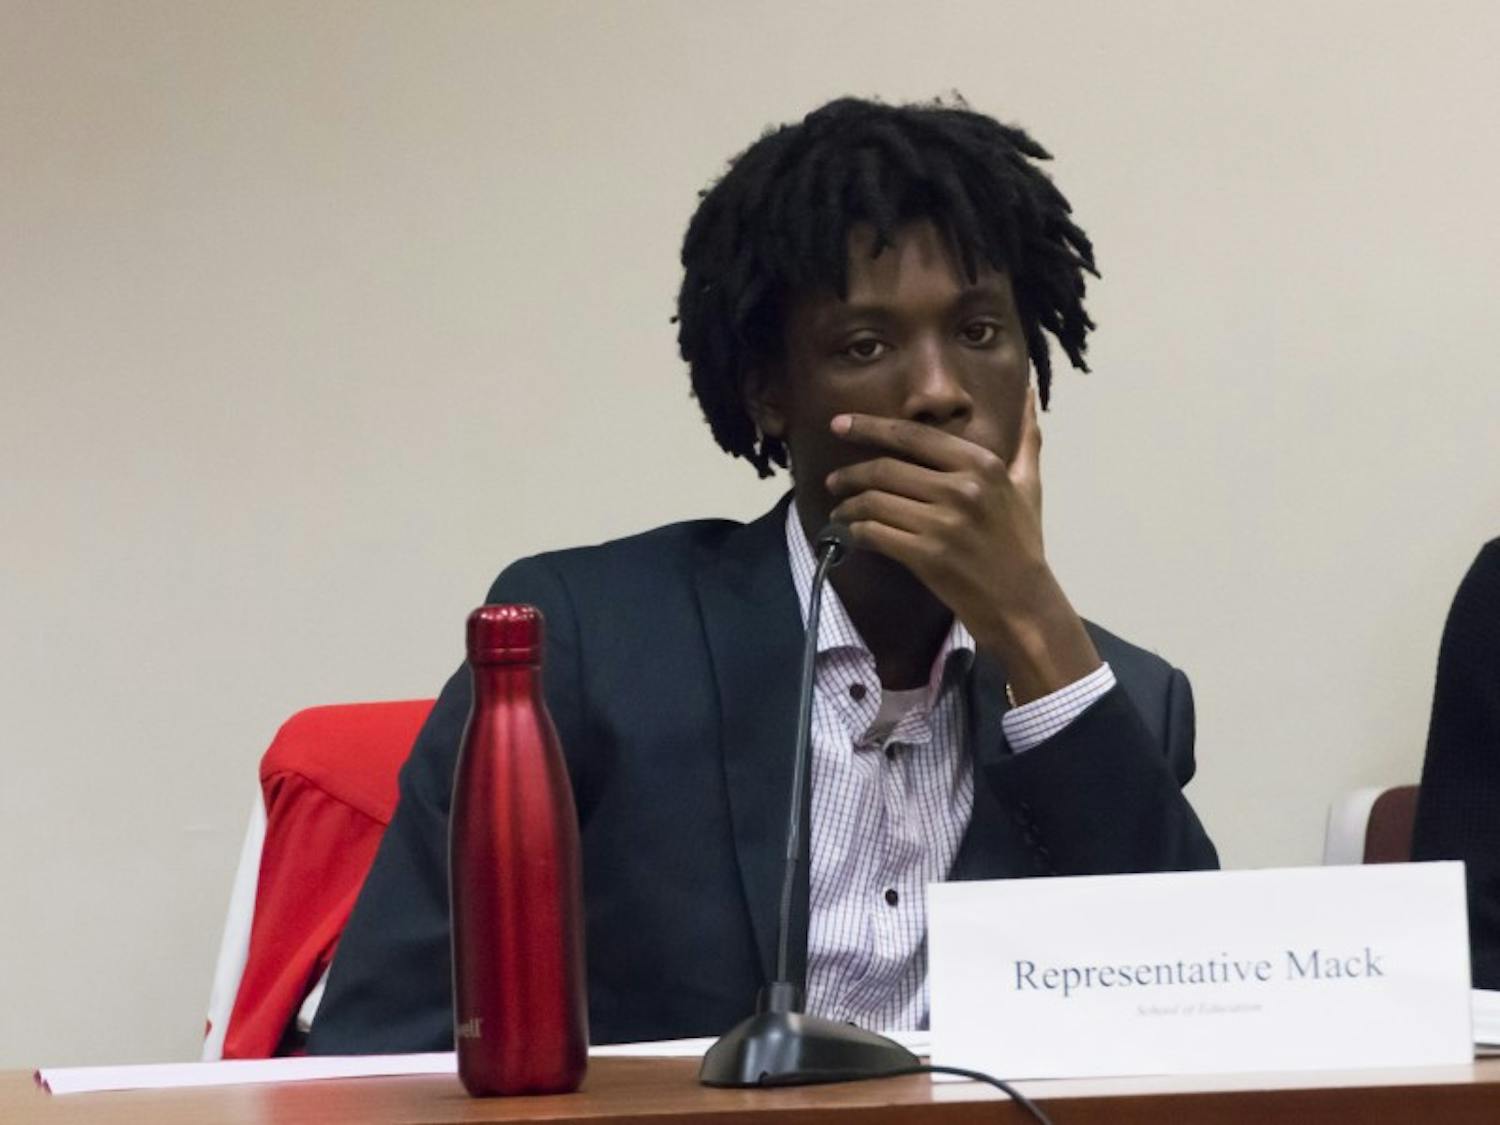 Tyriek Mack, a representative of the Associated Students of Madison, proposed legislation to urge the Chancellor and university to take steps to back up its rhetoric regarding diversity and inclusion on campus.